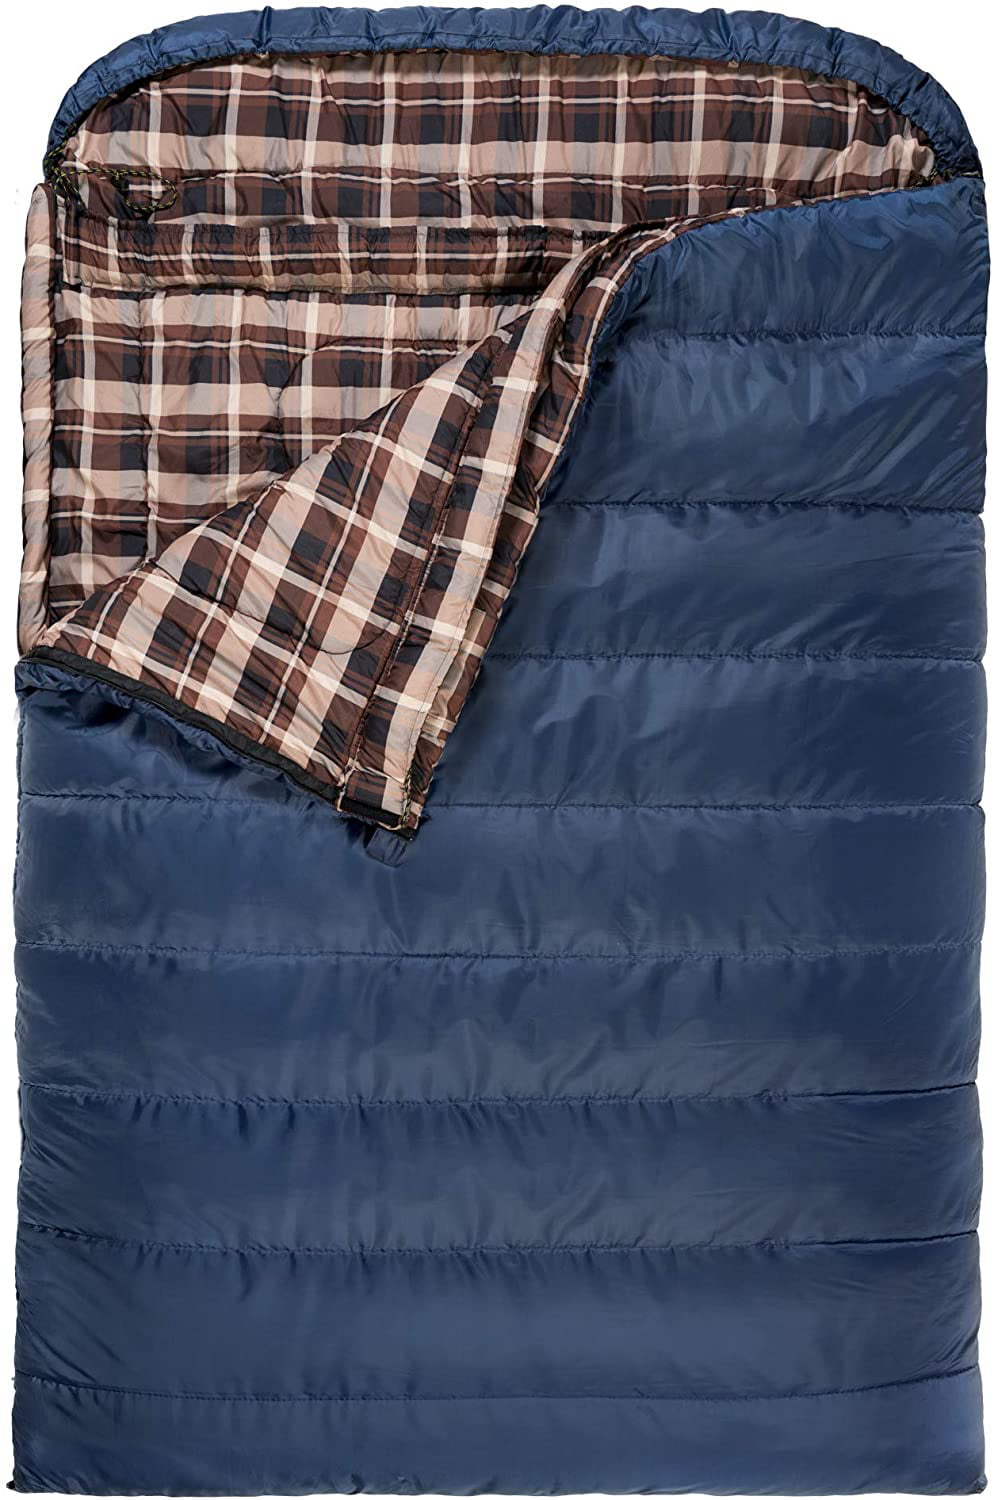 TETON Sports Mammoth Queen-Size Double Sleeping Bag; Warm and 